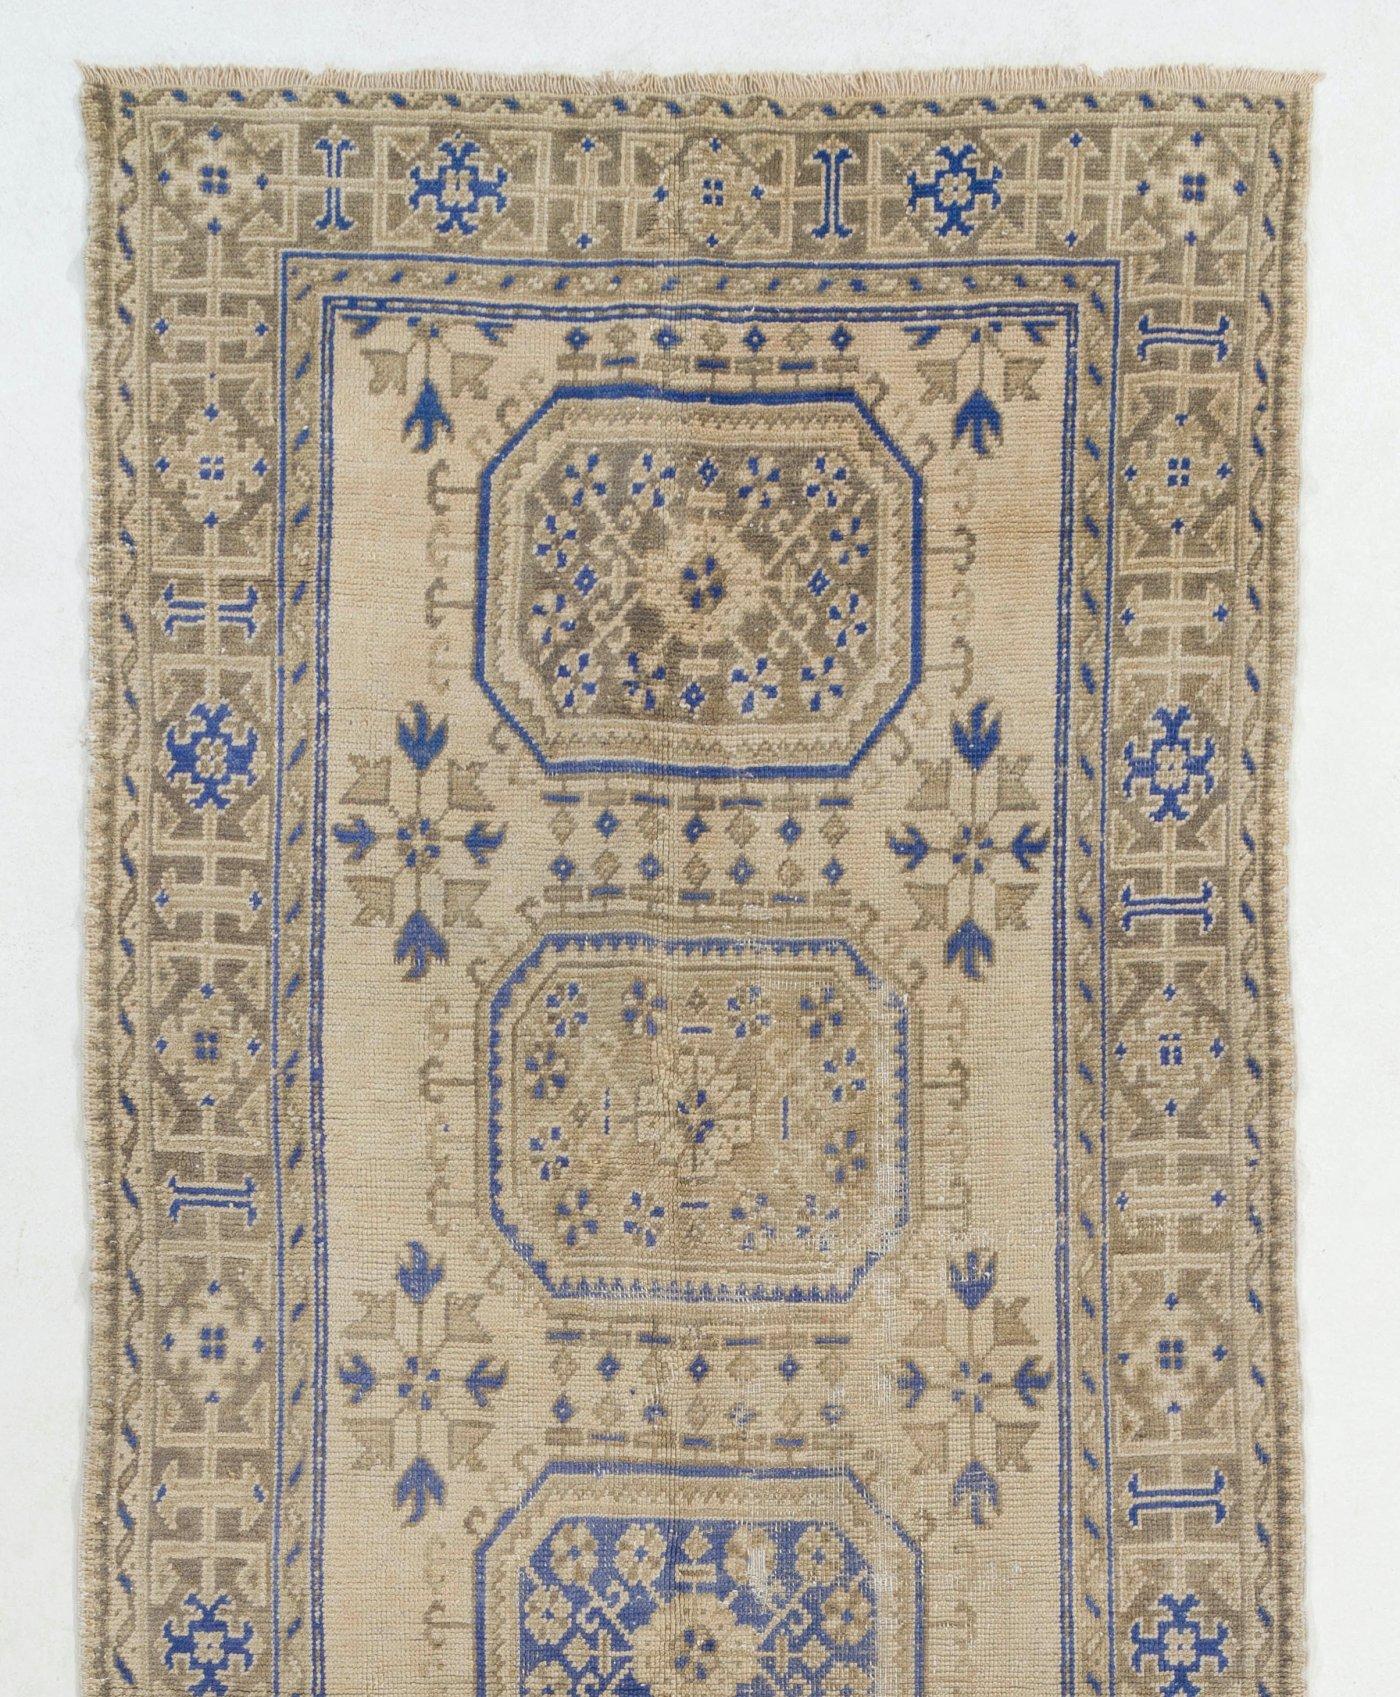 A gorgeous vintage Turkish runner rug, hand-knotted with even medium wool pile on wool foundation. It features geometric medallions decorated with floral motifs. It is in good condition, professionally-washed and sturdy. Measure: 4.6x12.2 Ft.